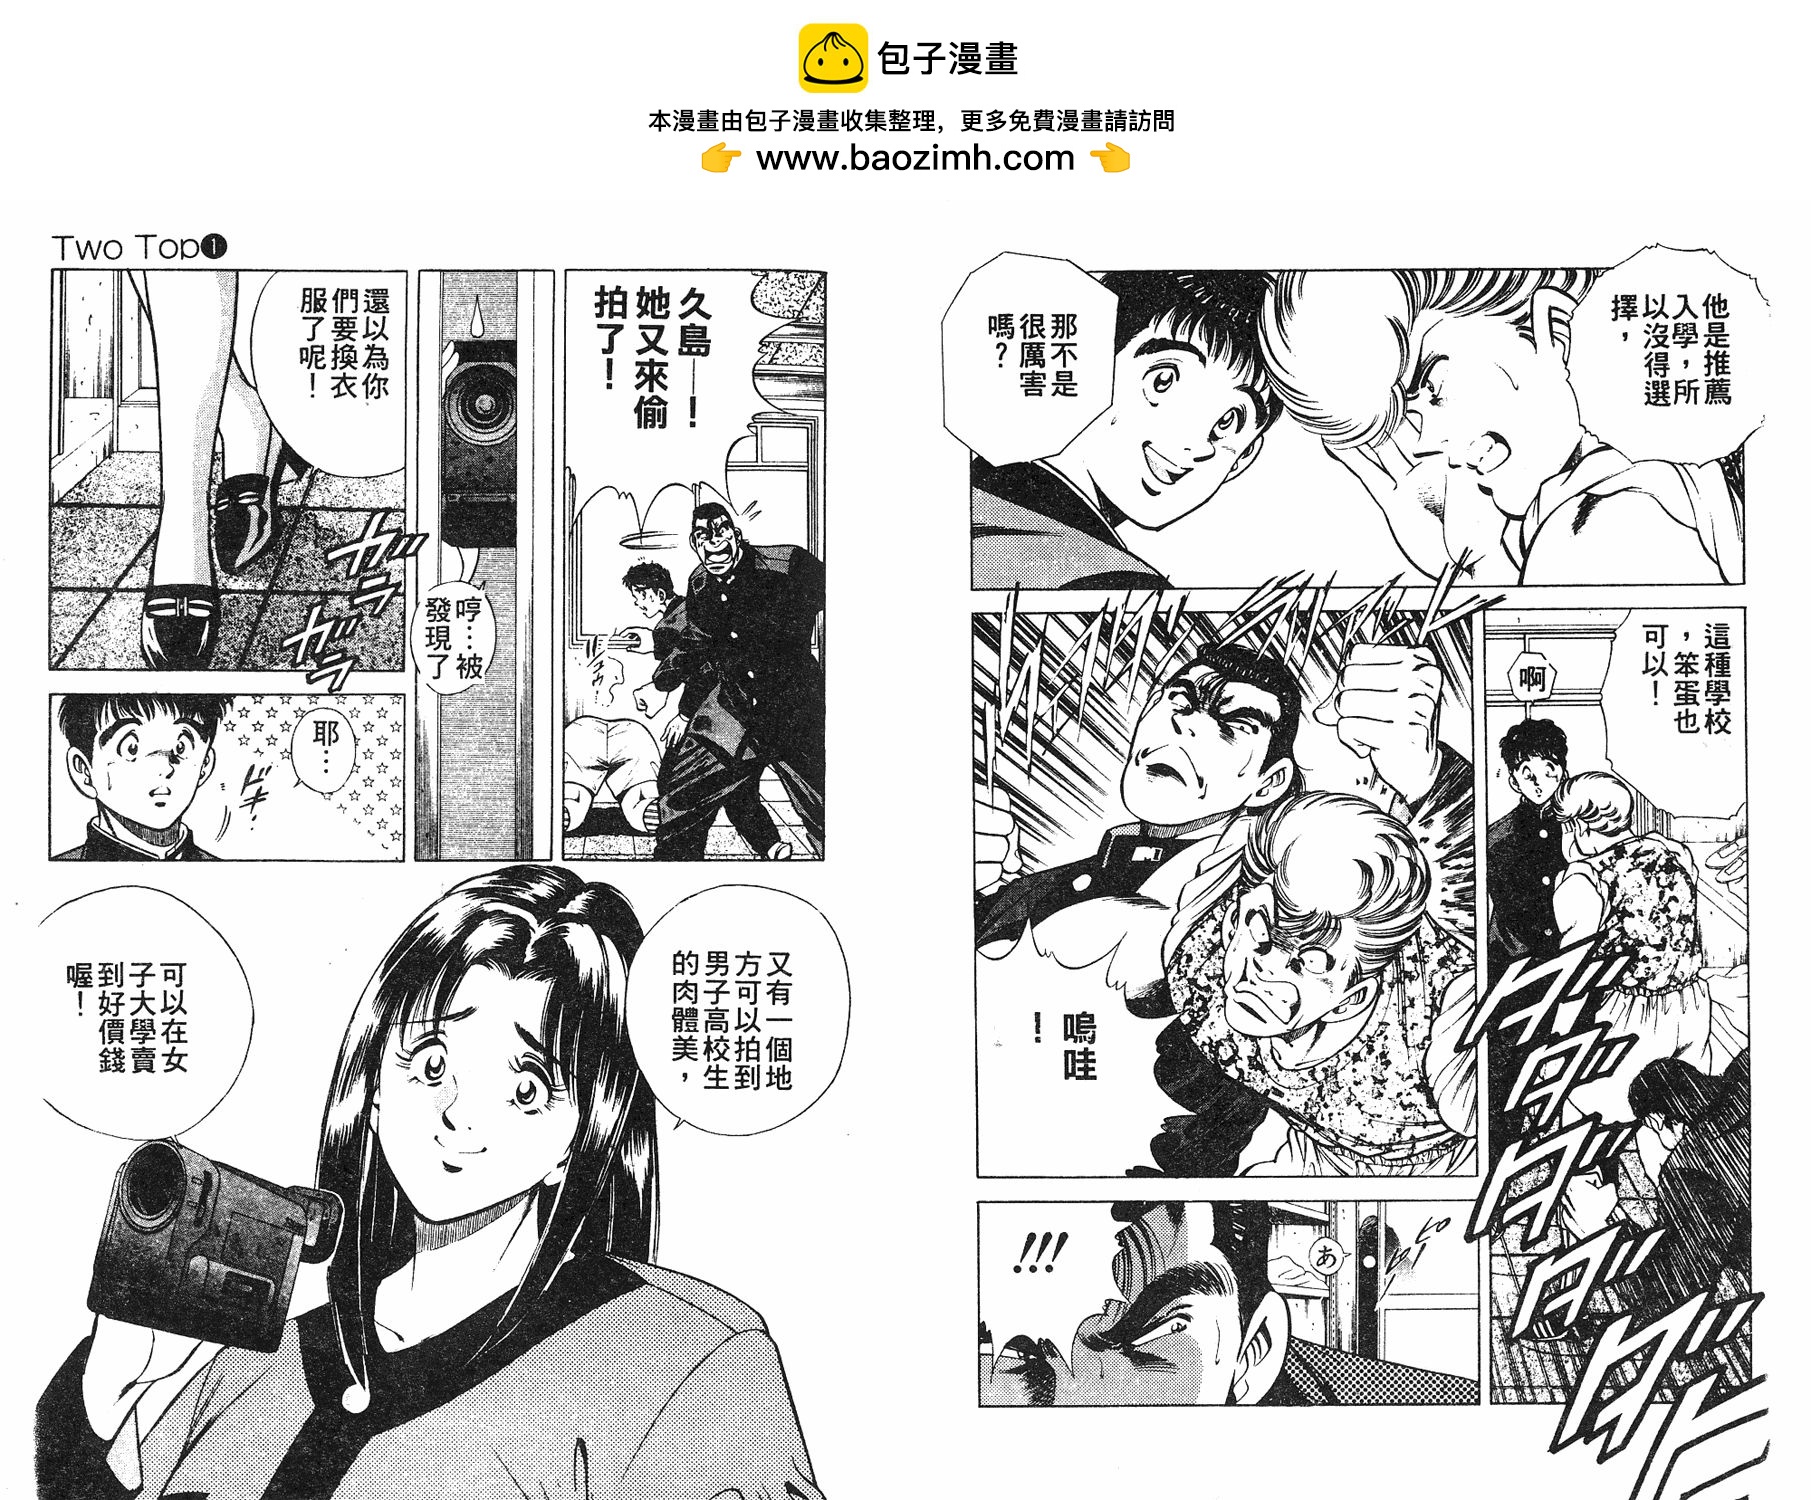 Two Top - 第01卷(1/3) - 6